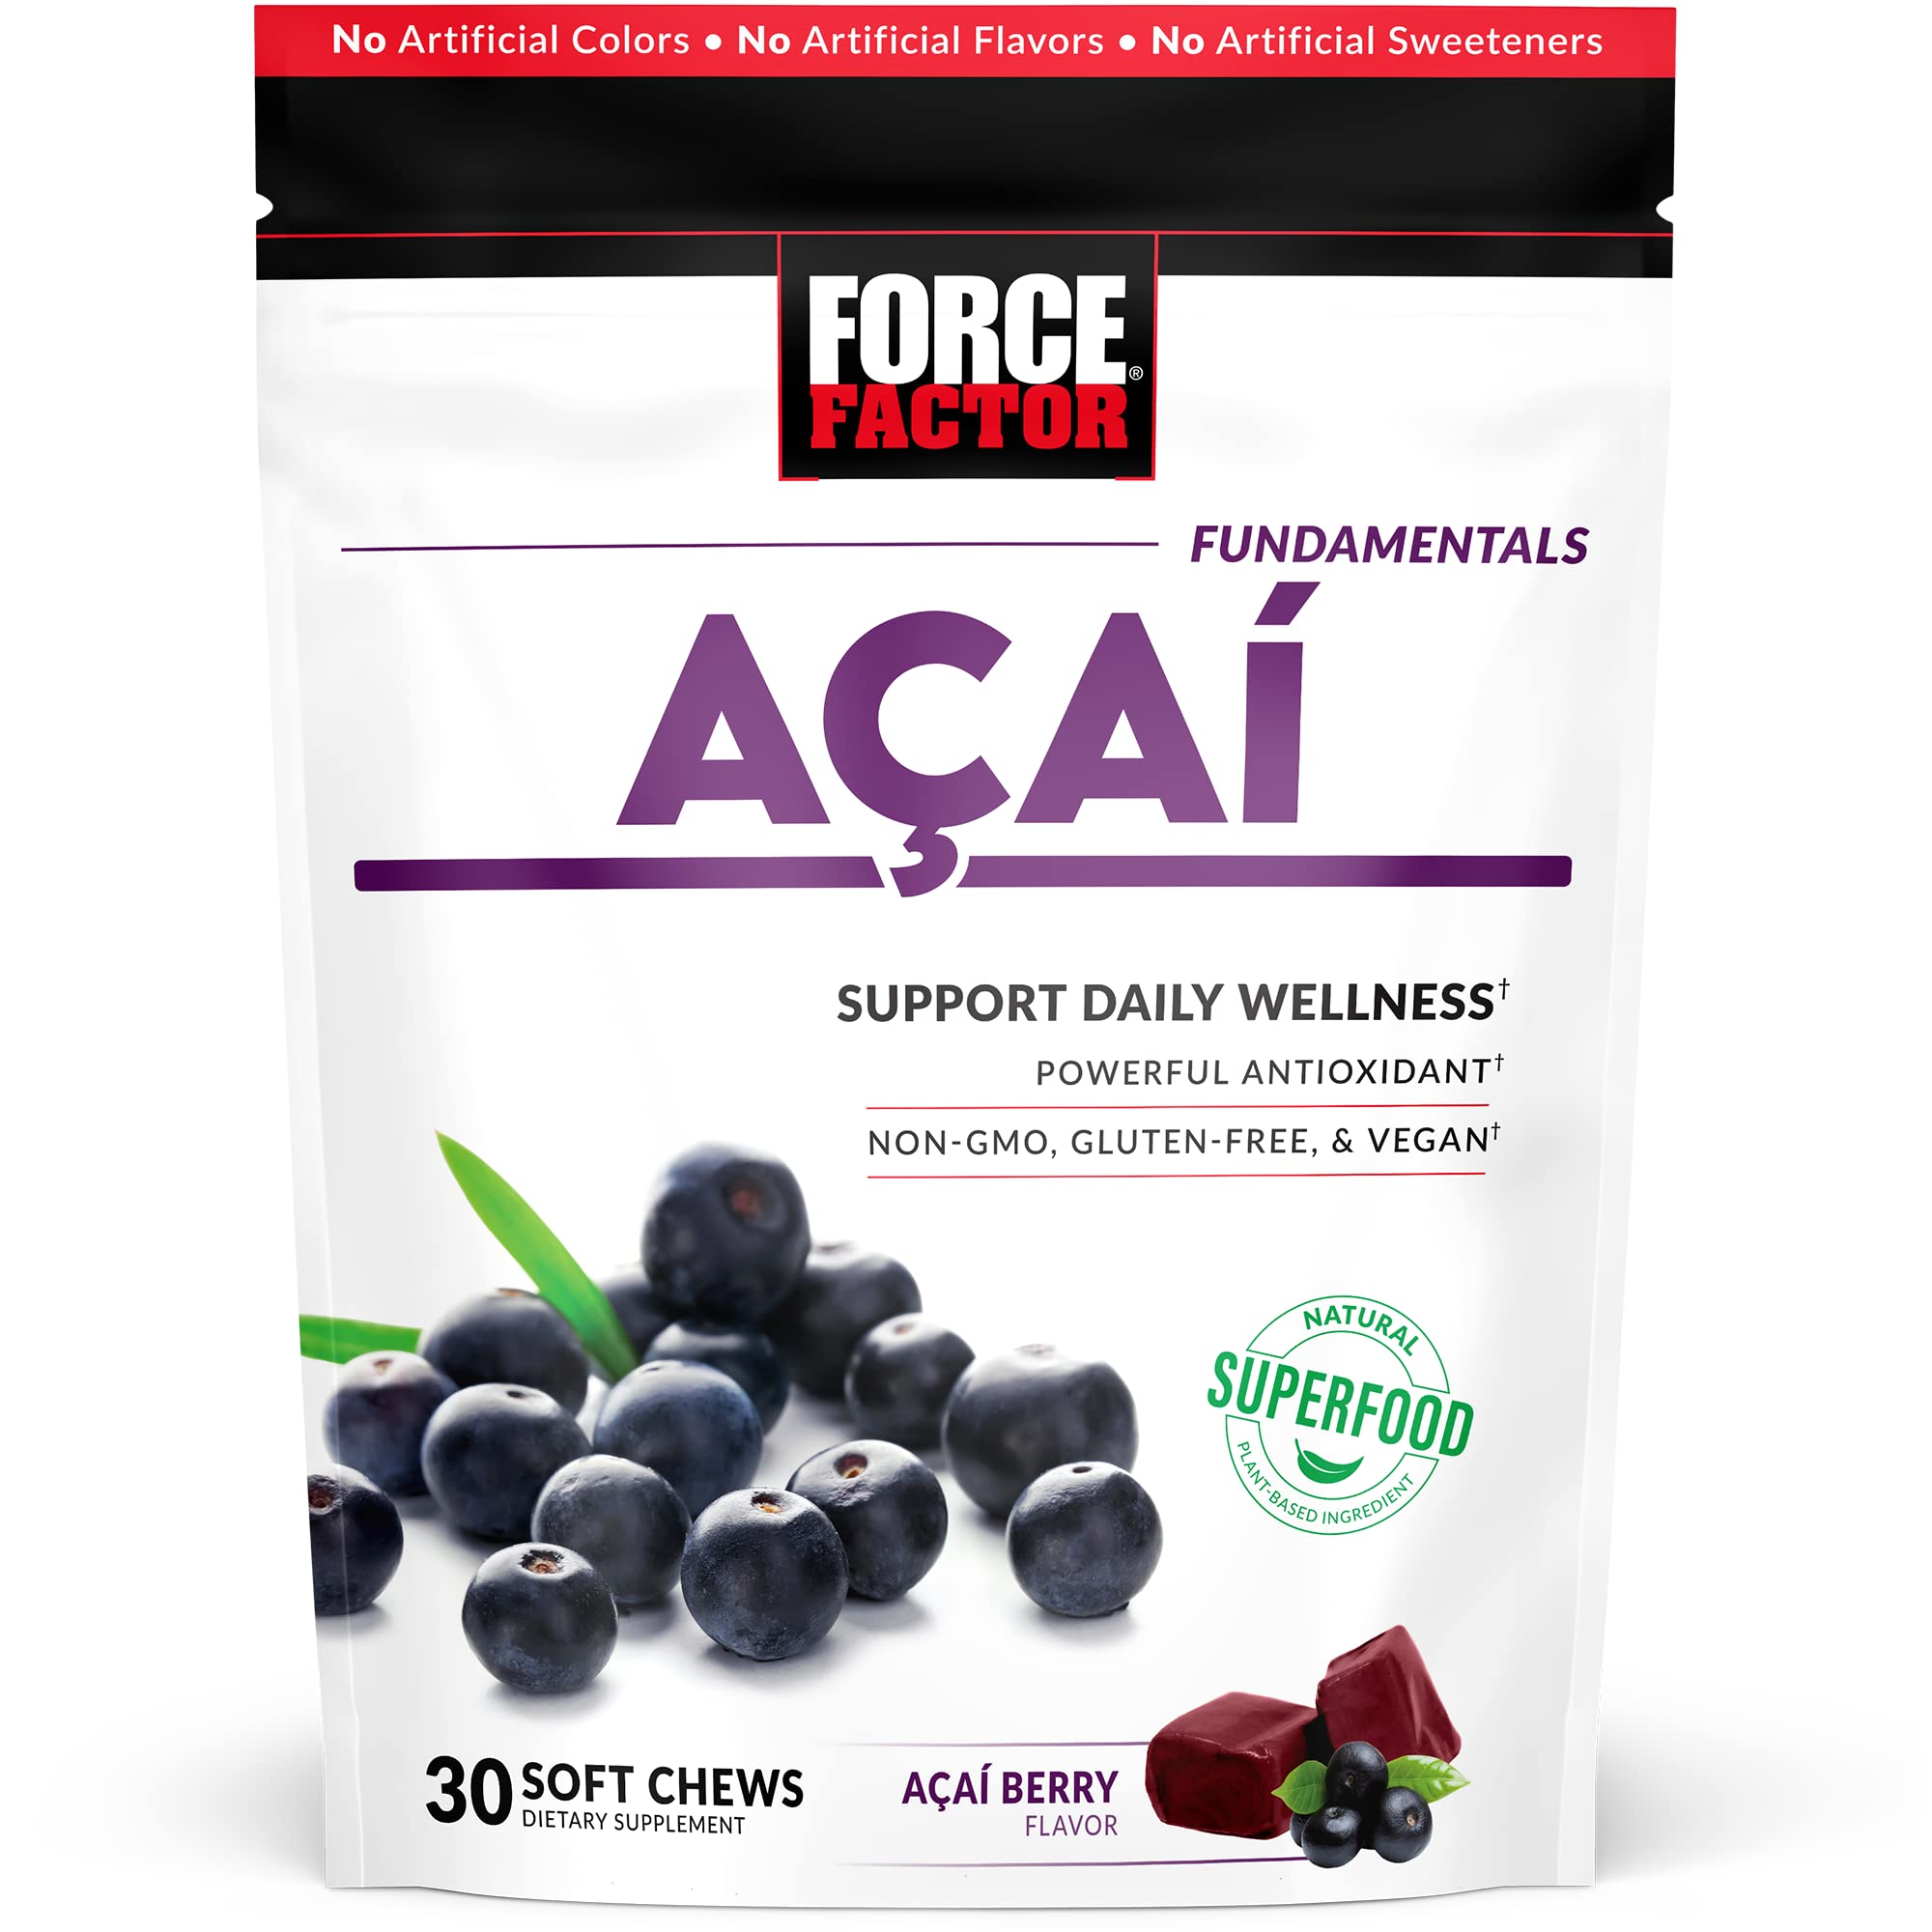 30-Count Force Factor Acai Superfood Soft Chews for Immune Support $5.06 ($0.16 each) w/ S&S + Free Shipping w/ Prime or on $35+